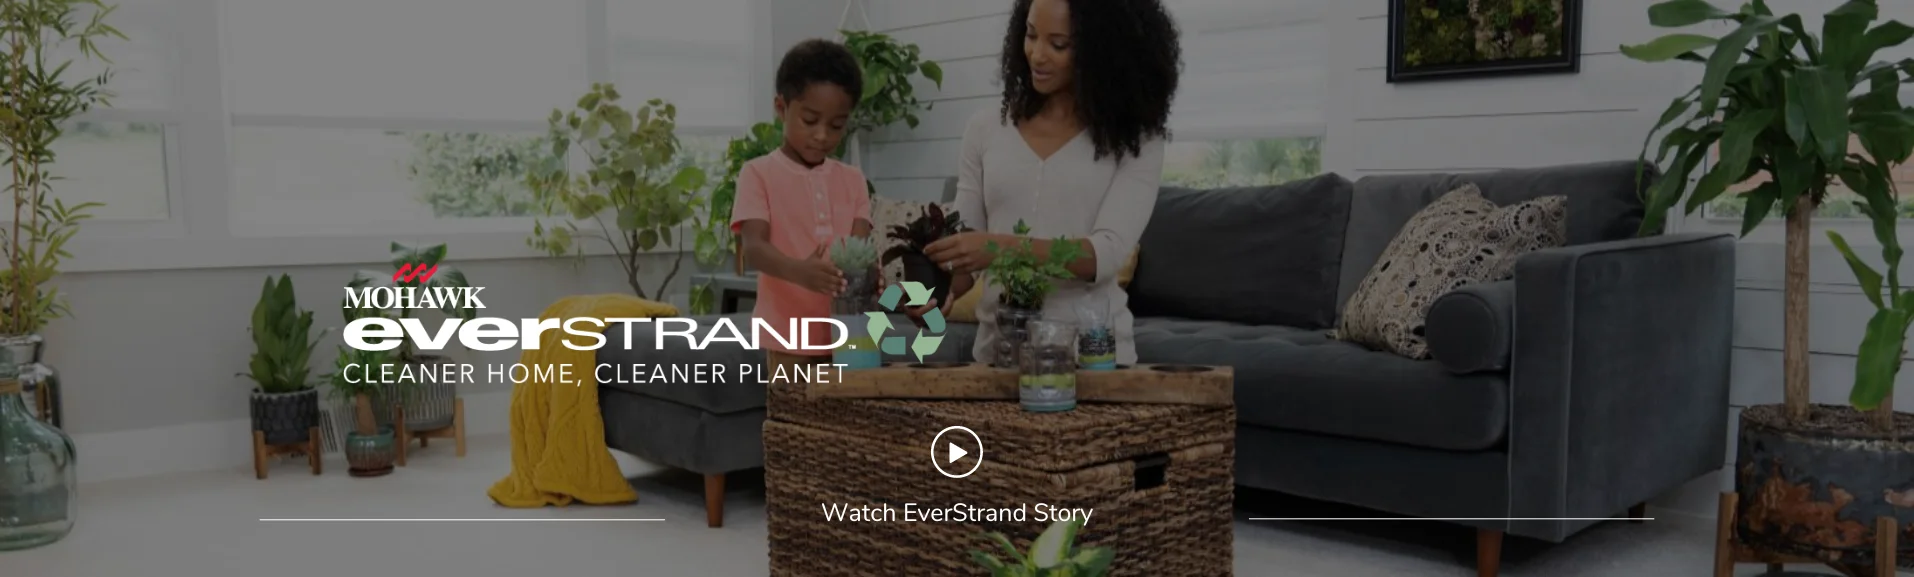 Mohawk EverStrand - cleaner home, cleaner planet watch video